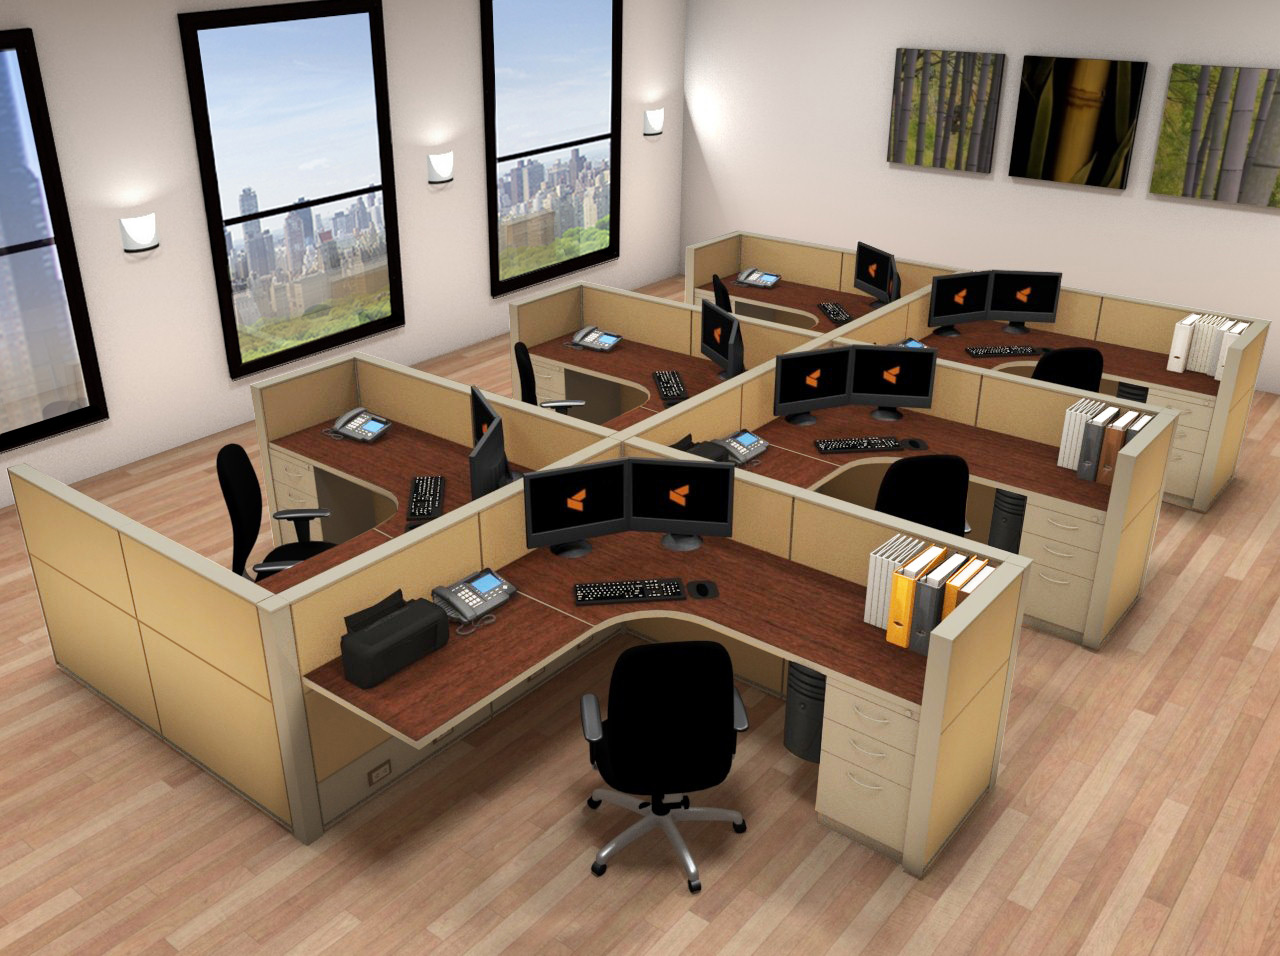 6x6 Cubicle Workstations from AIS - 6 Pack Cluster